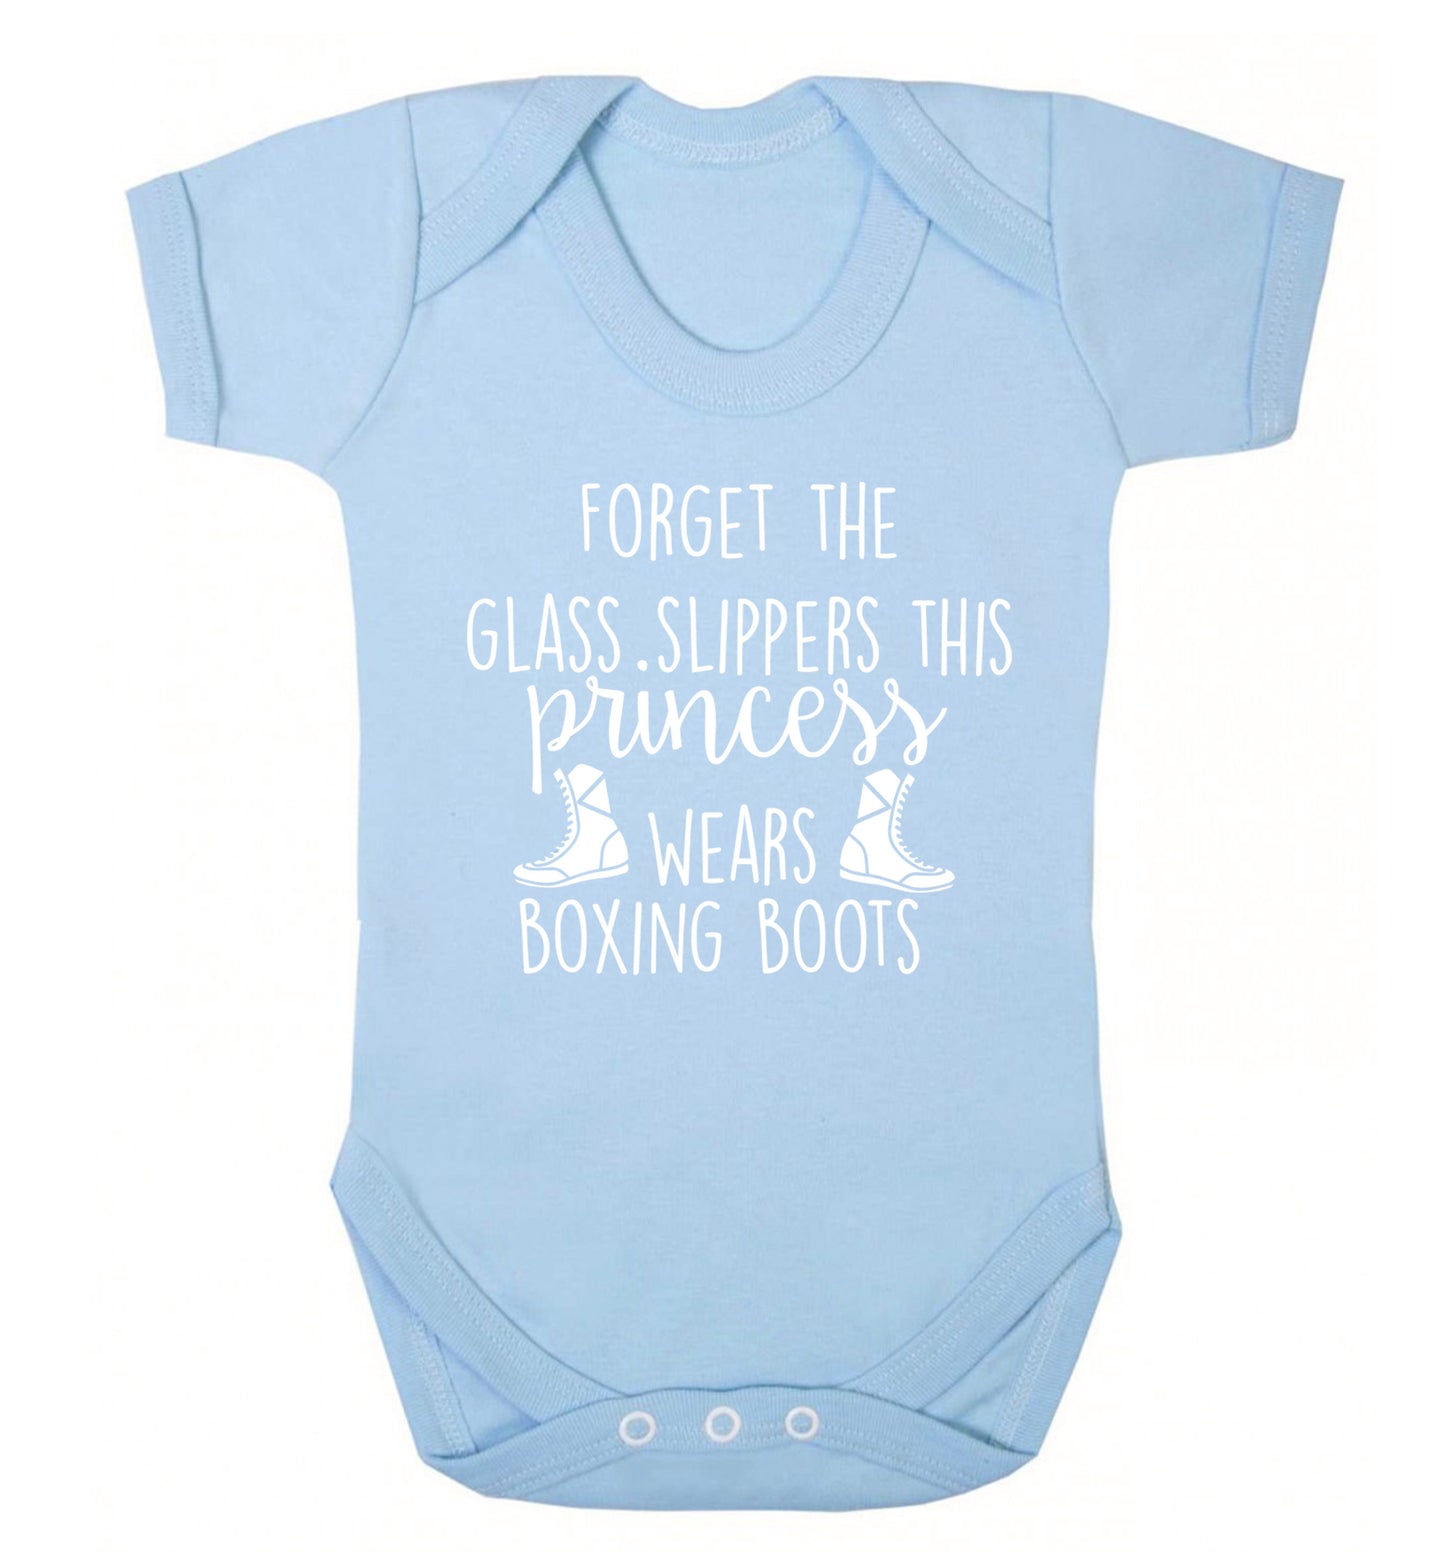 Forget the glass slippers this princess wears boxing boots Baby Vest pale blue 18-24 months